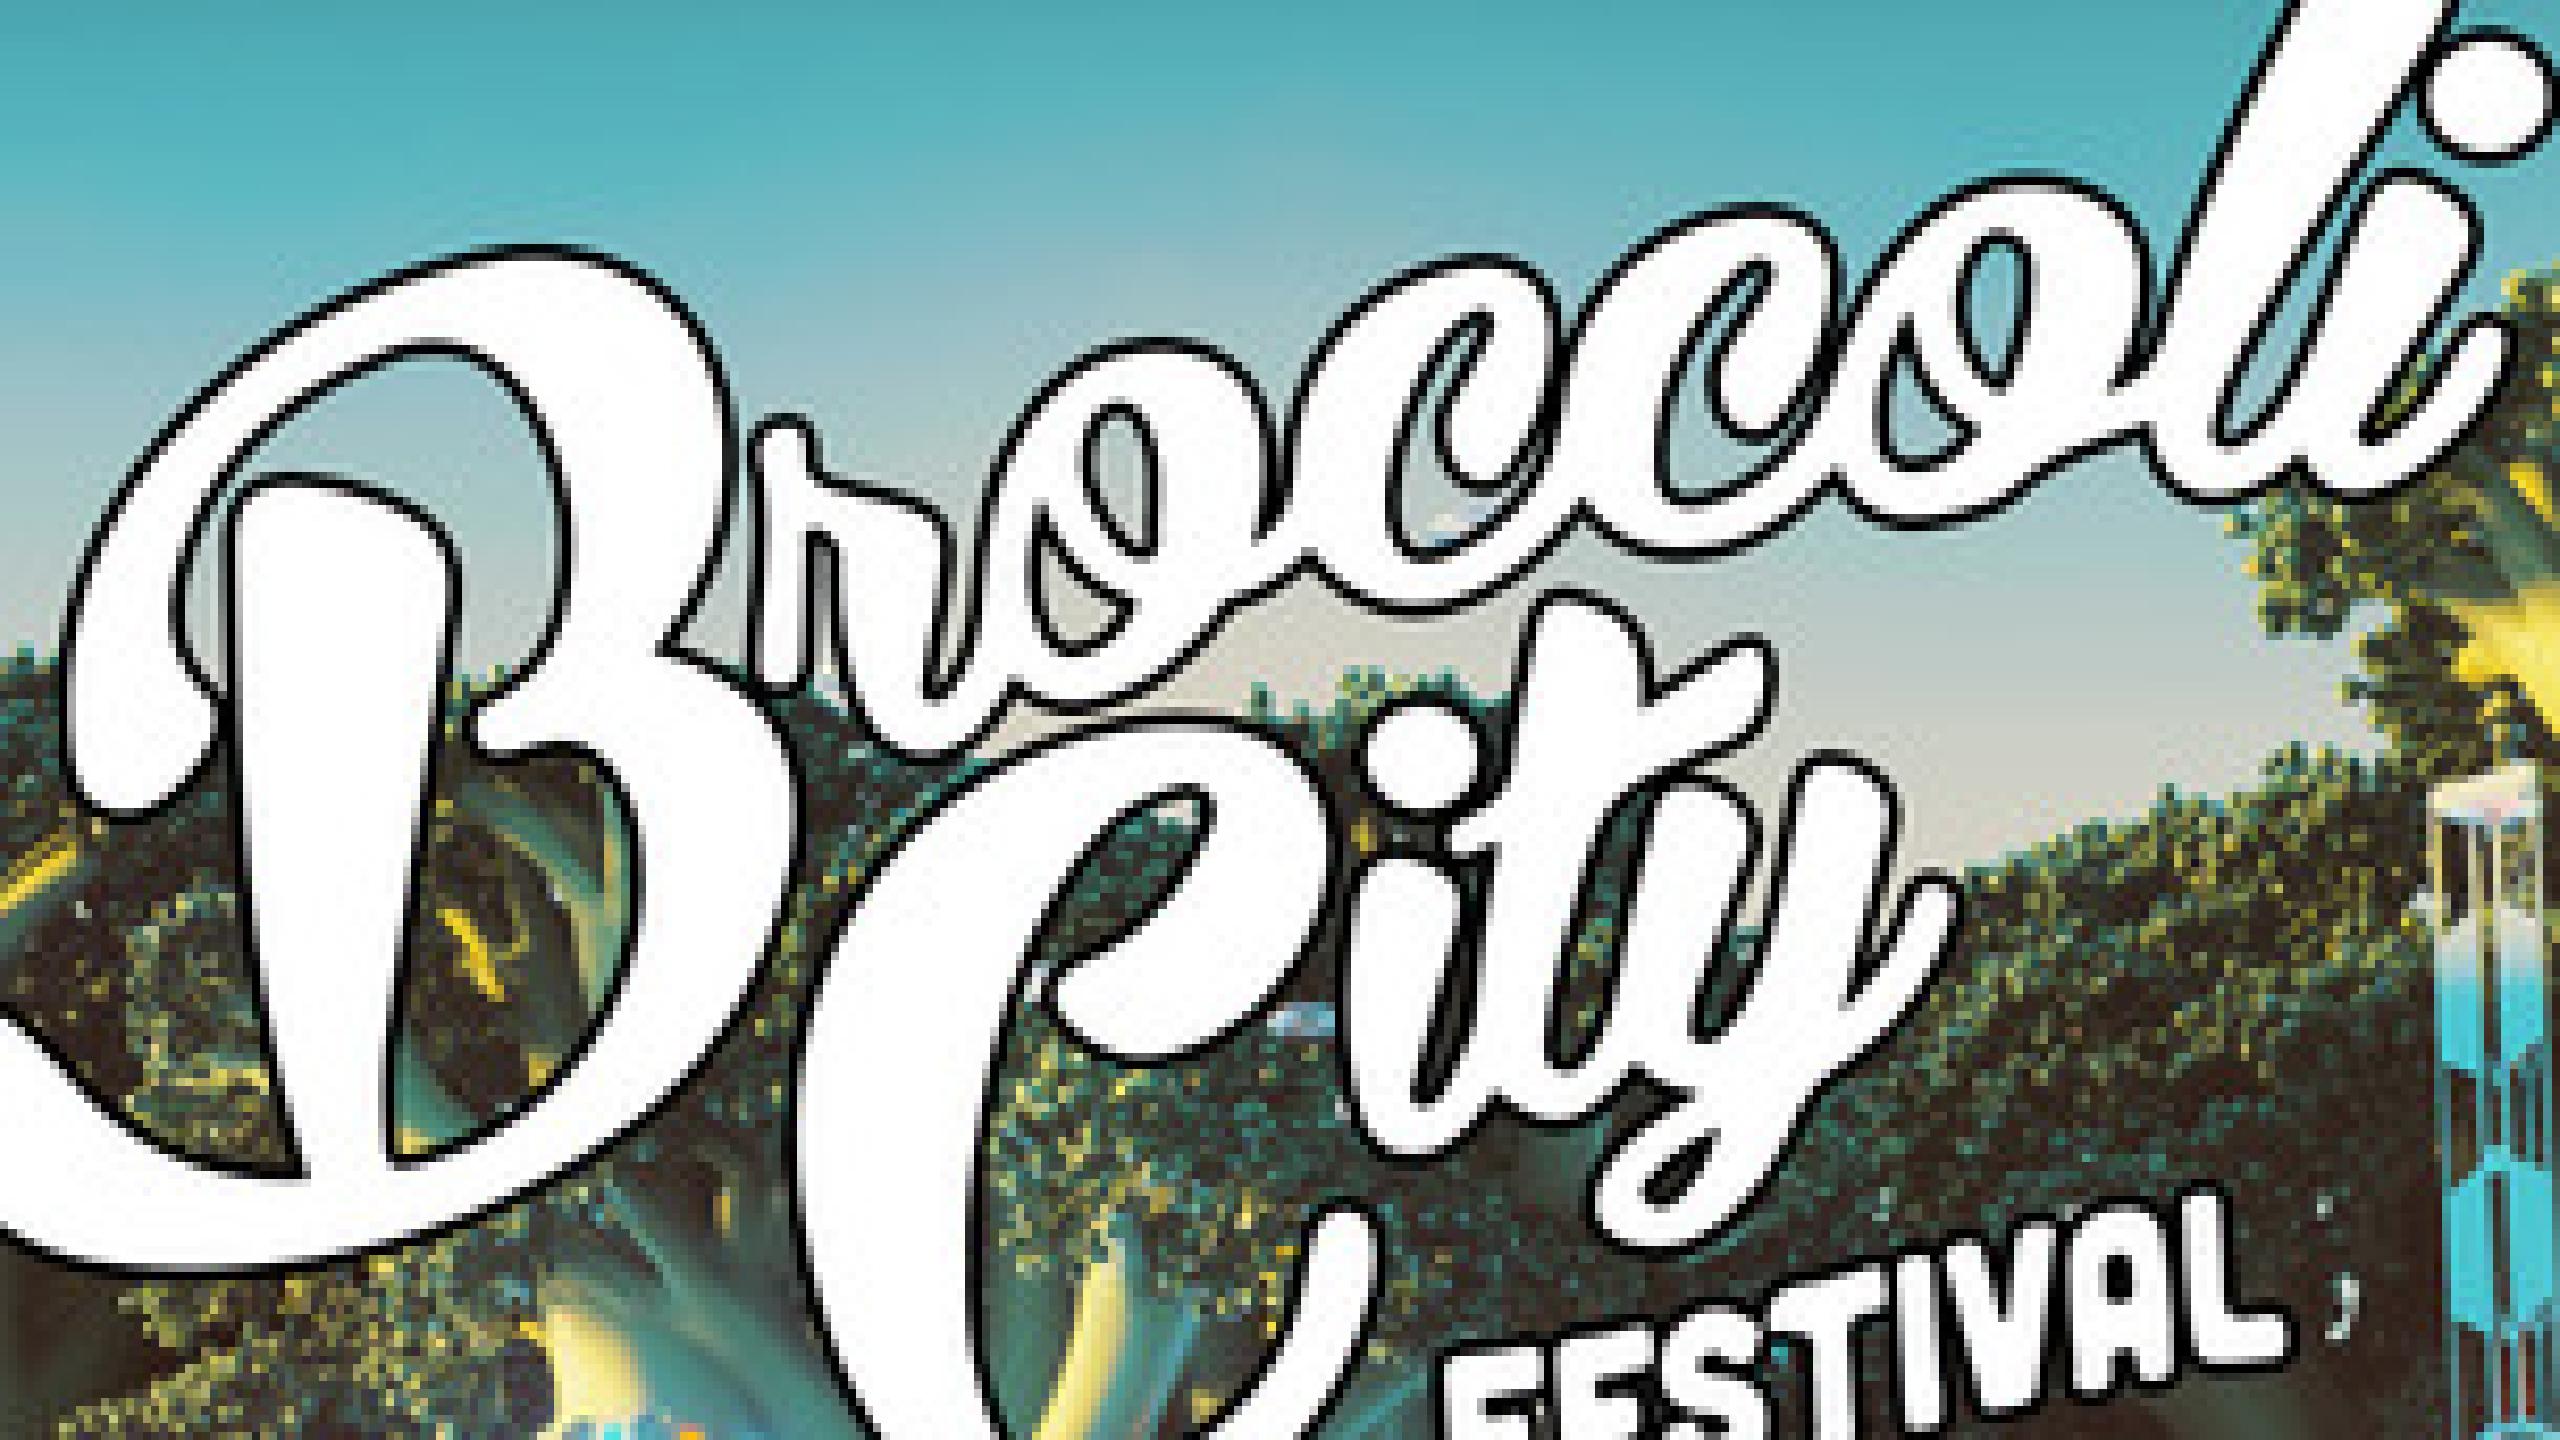 Broccoli City Festival MD 2019. Tickets, lineup, bands for Broccoli